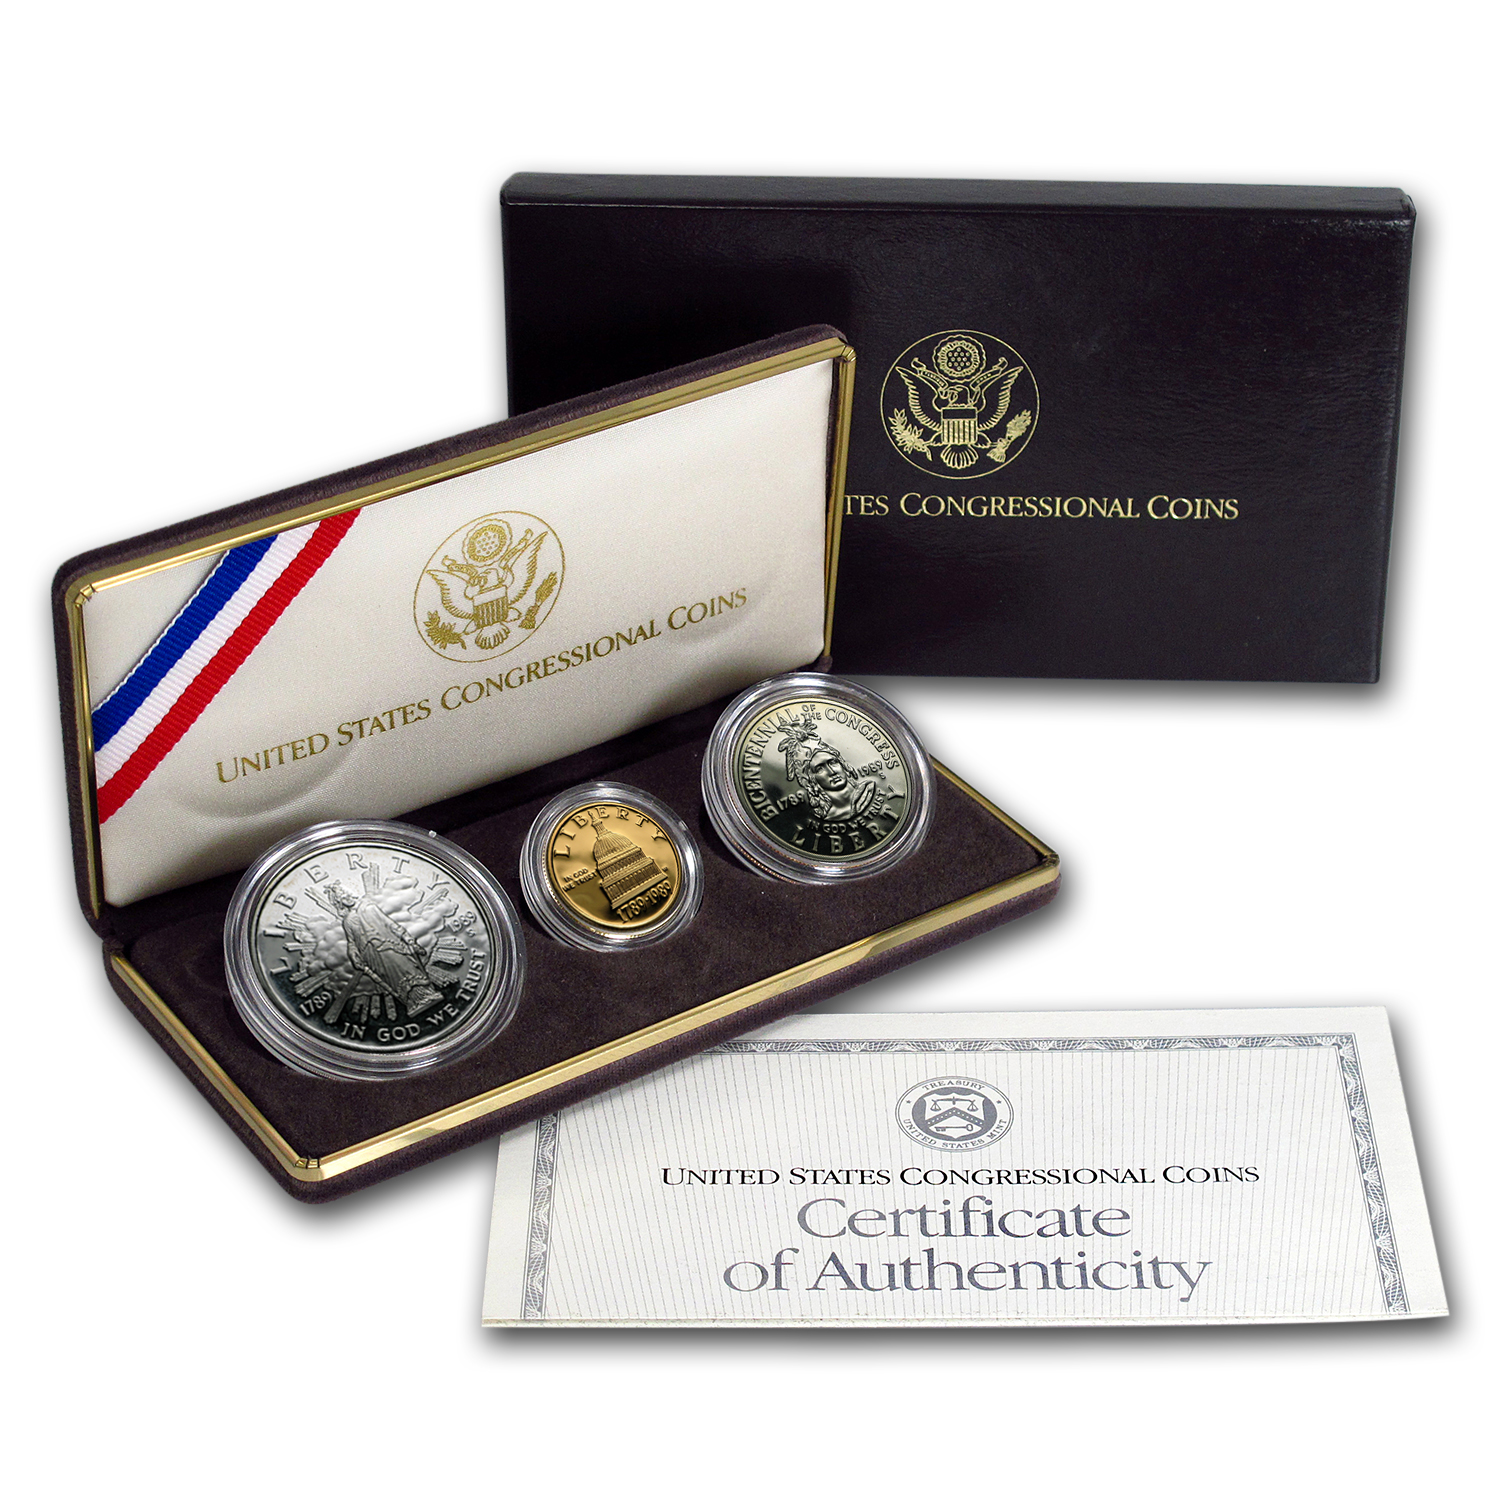 Details about   1989 US Congressional 2-Coin Commemorative Proof Set 